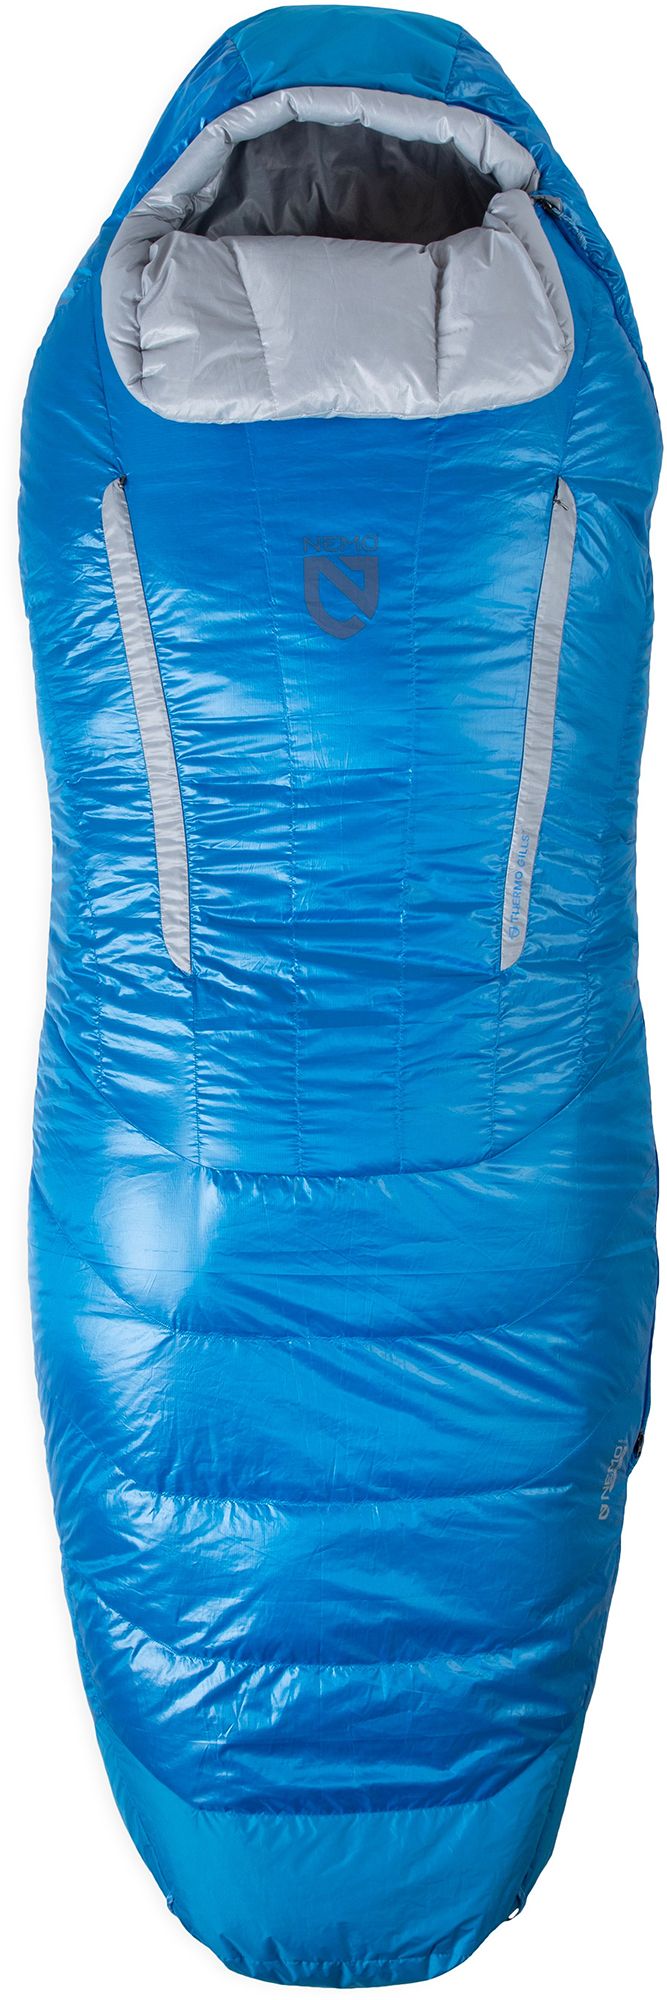 Photos - Suitcase / Backpack Cover Nemo Men's Endless Promise 30 Down Sleeping Bag, Long, Brilliant Blue 24VY 